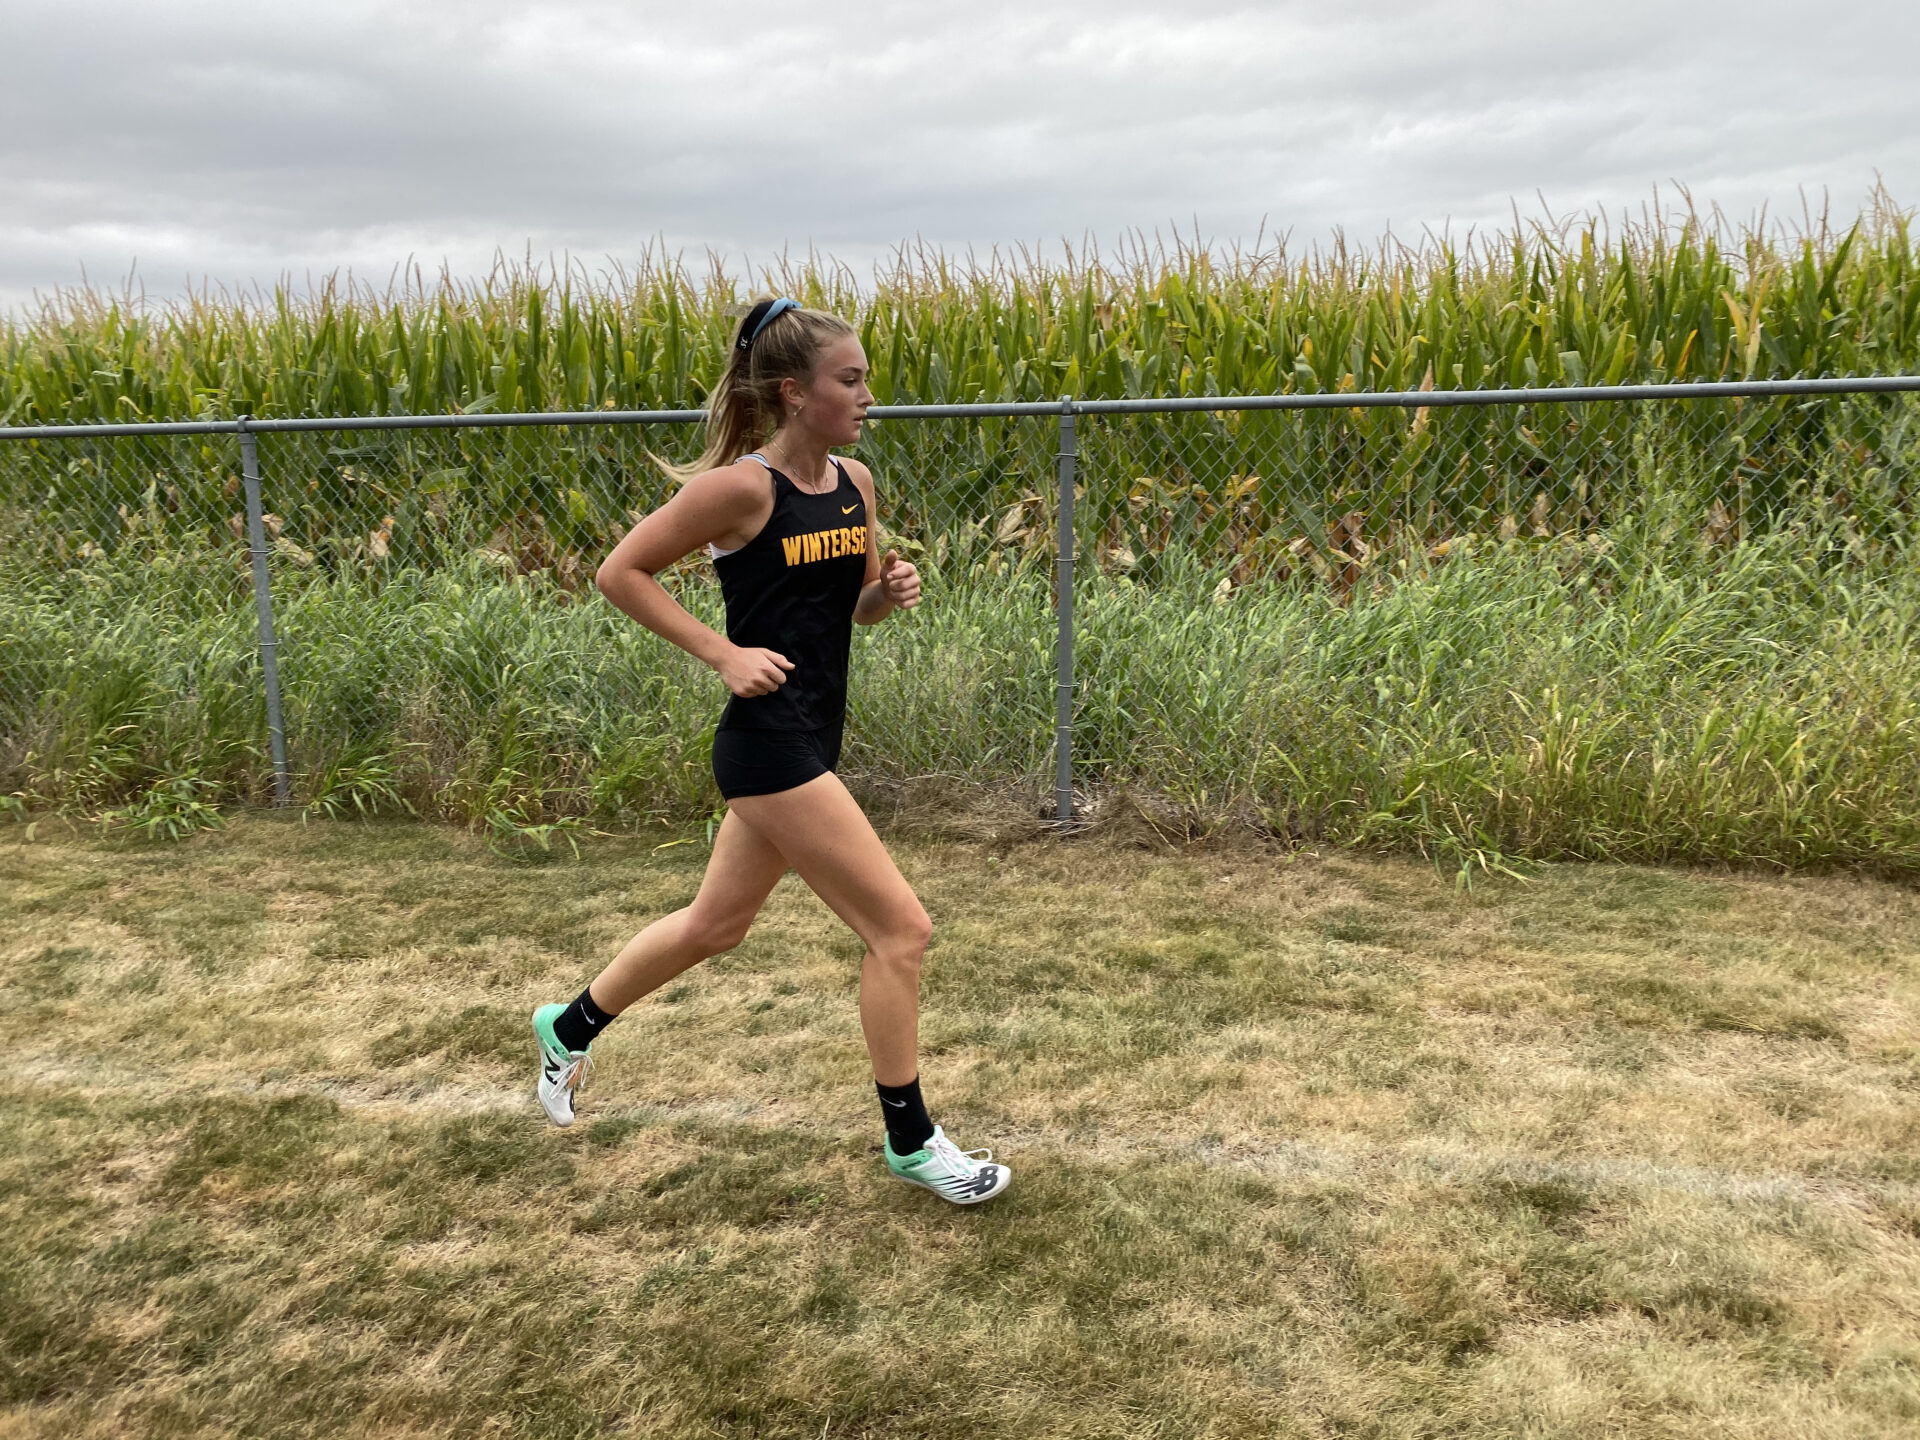 Cross-country running is one of several sports gaining popularity in the U.S. and is the 6th most popular sport for girls.